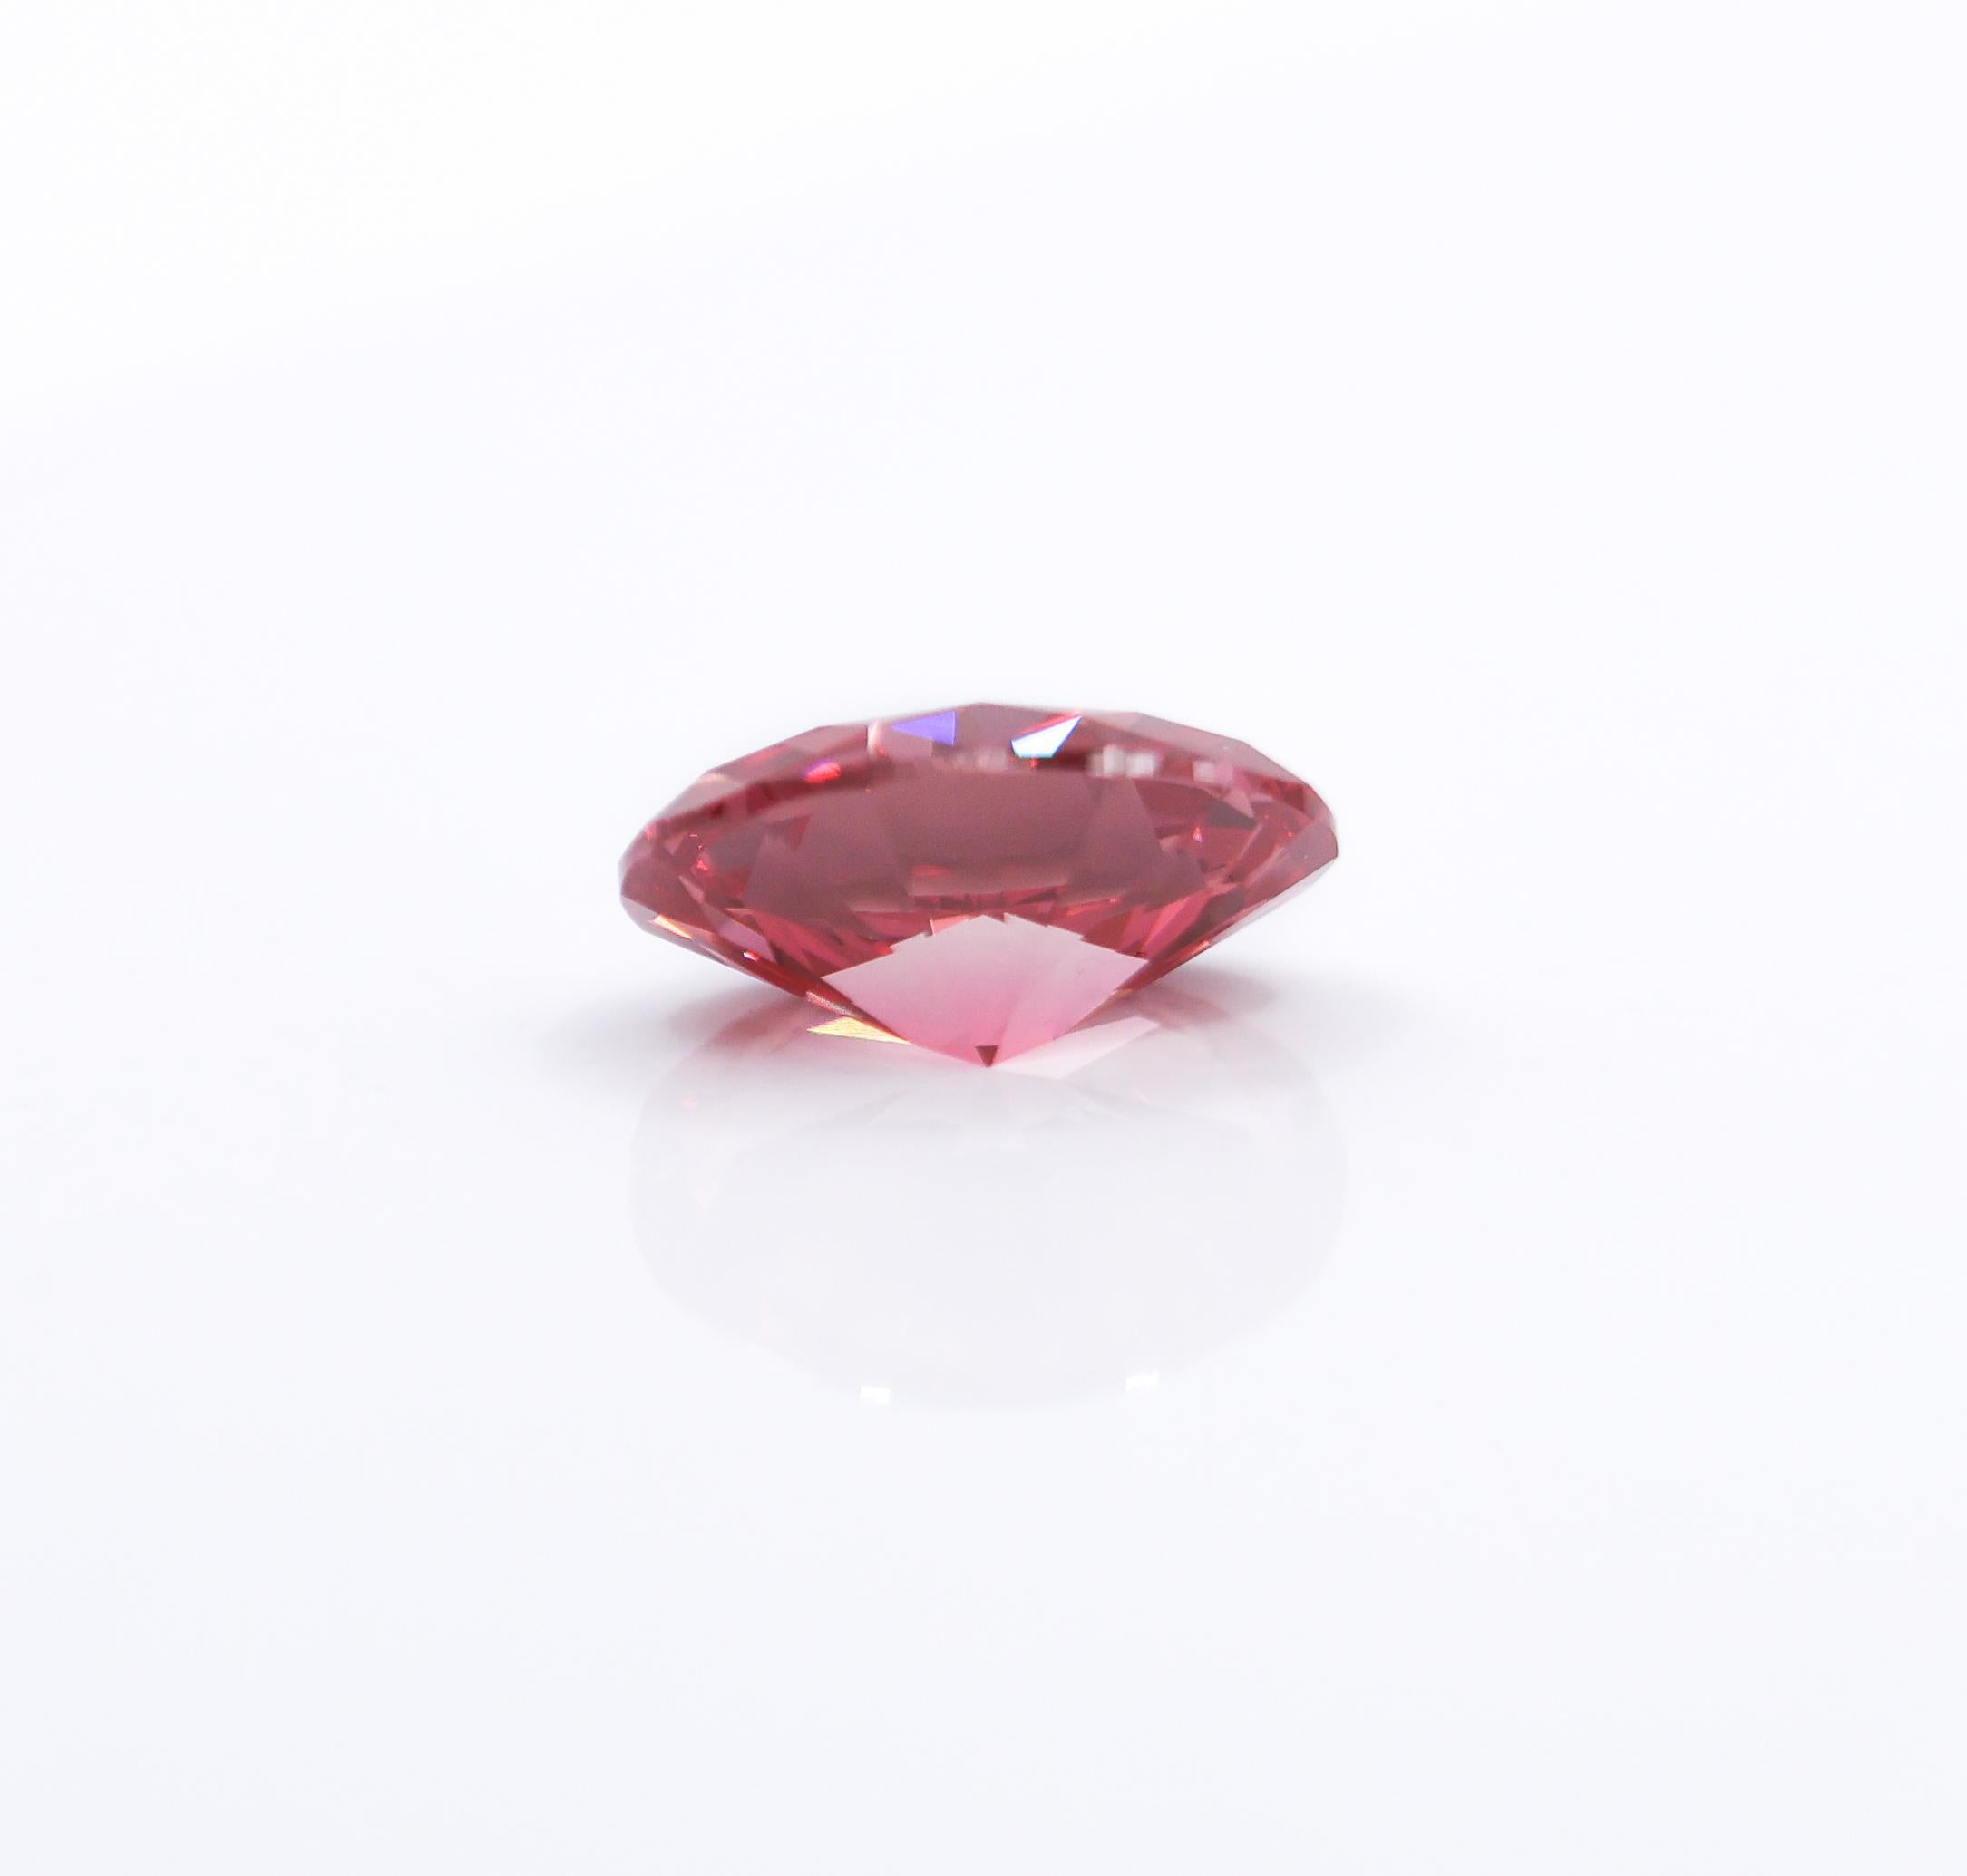 Brilliant Cut GIA Certified 2.31 Carat VVS1 Fancy Deep Pink Diamond Natural Earth Mined For Sale